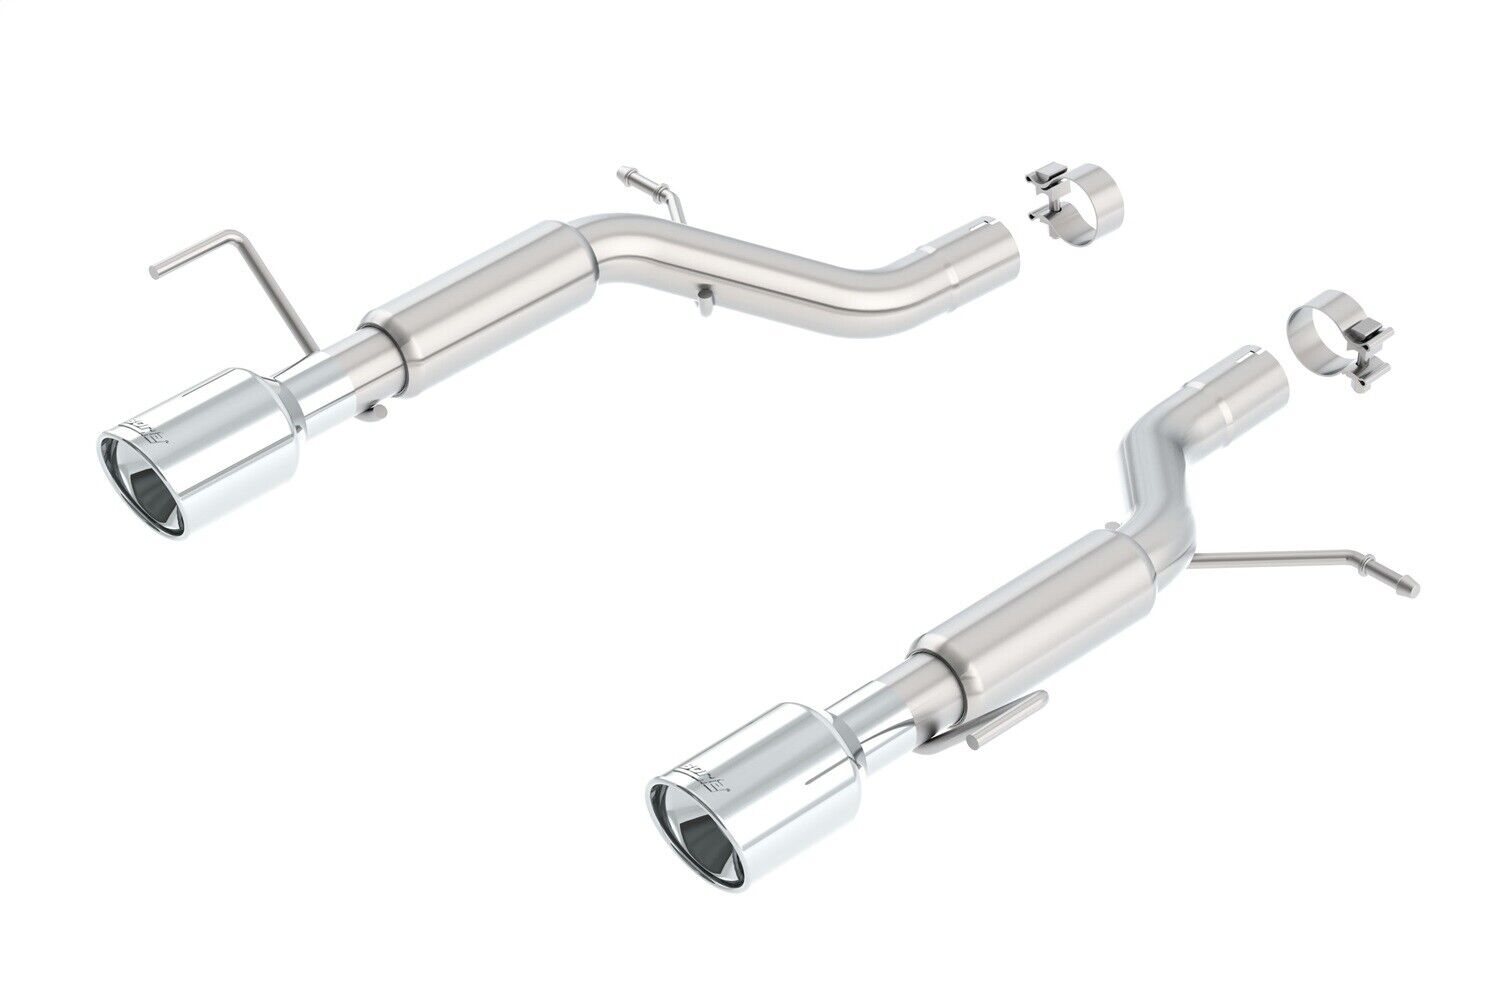 Borla 11844 S-Type Axle-Back Exhaust System Fits 13-15 ATS